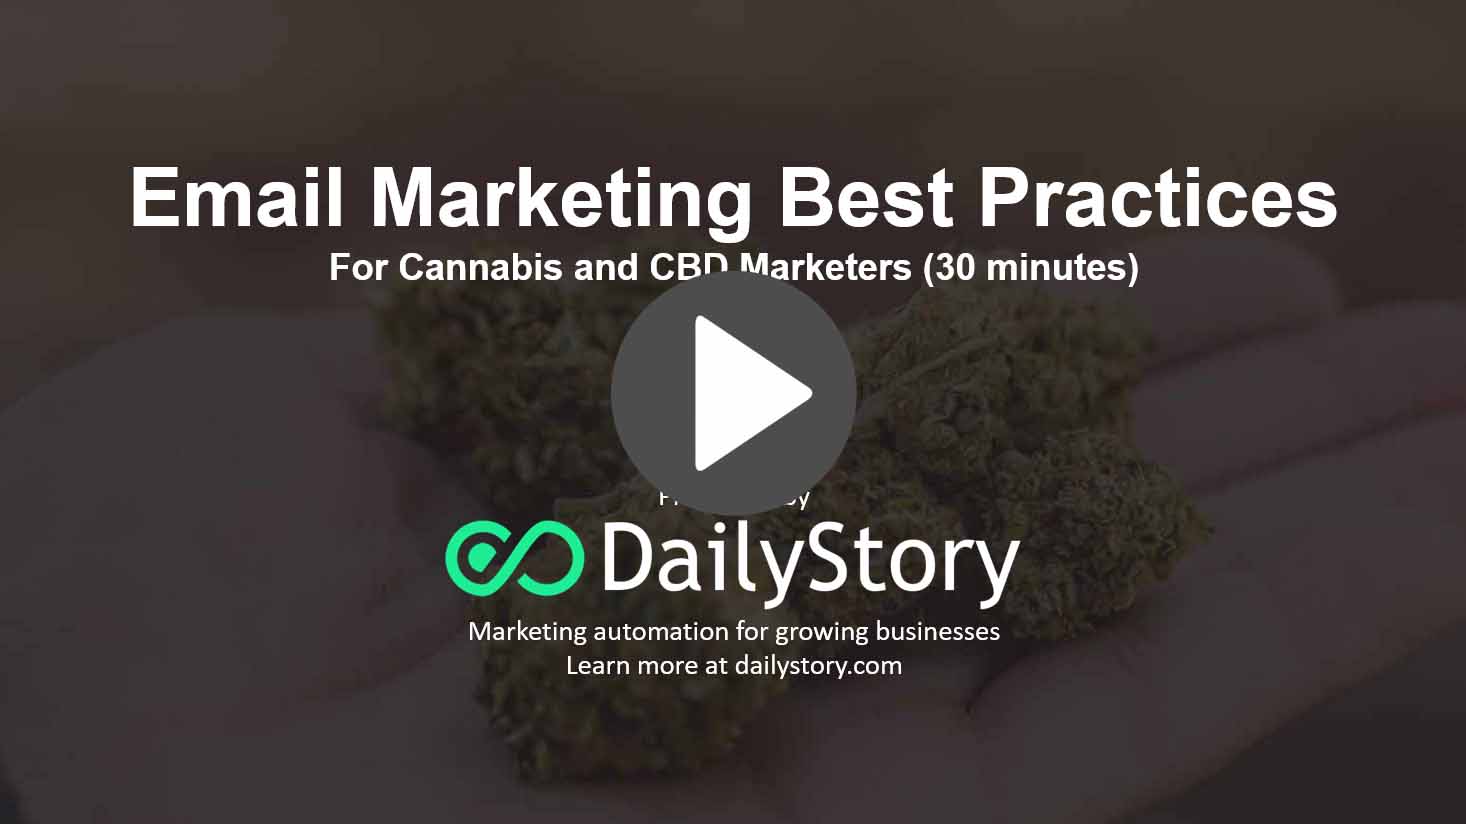 Email Marketing Best Practices for Cannabis and CBD Marketers